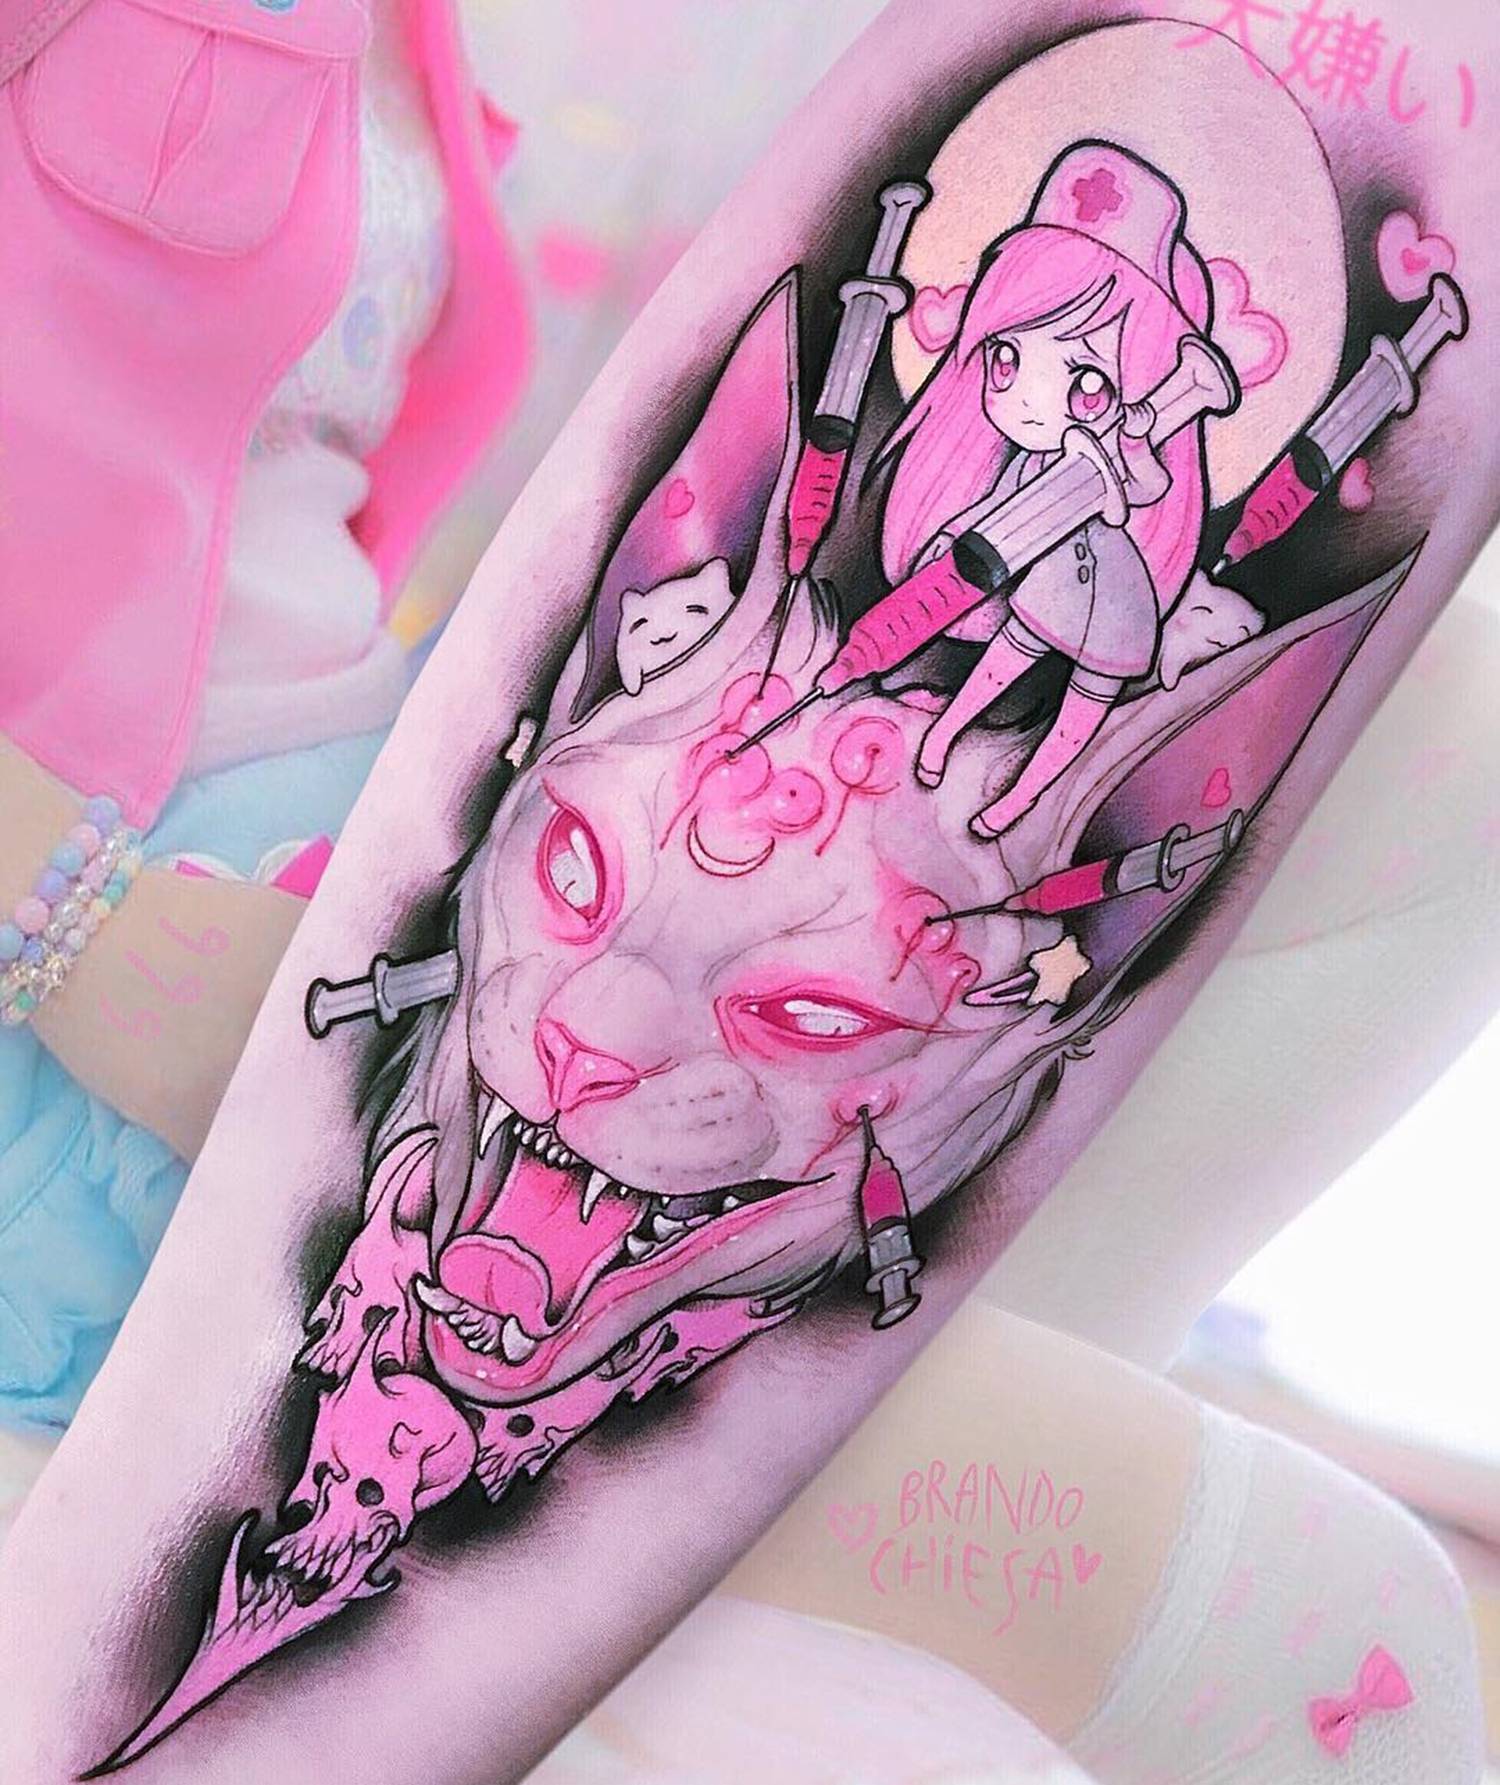 Neo-Traditional Tattoos of "Pastel Gore" by Brando Chiesa.